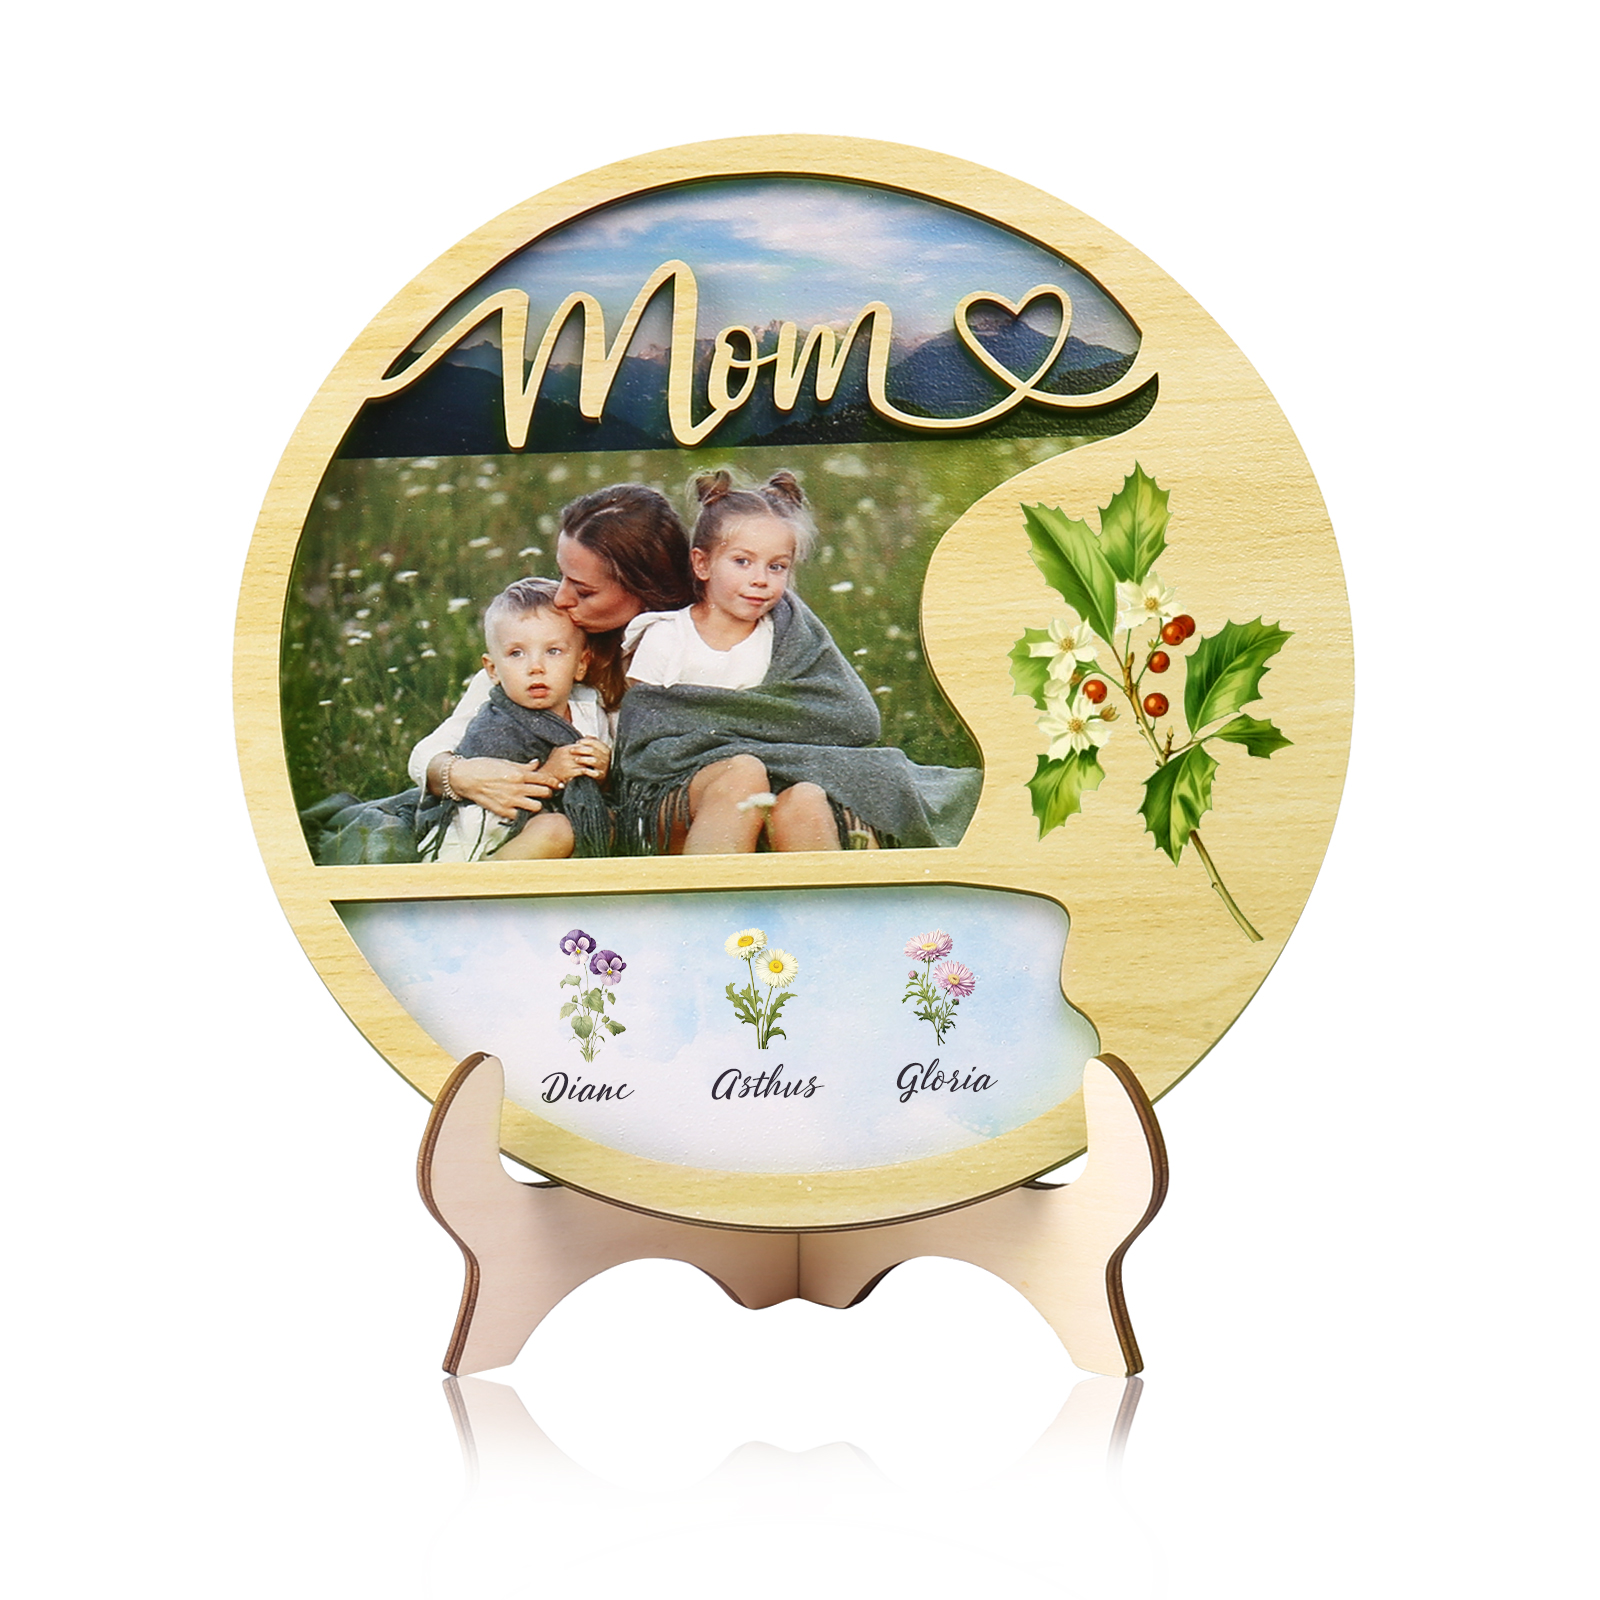 3 Names - Customized Photo Birth Flower Wooden Ornament Decoration for Mom